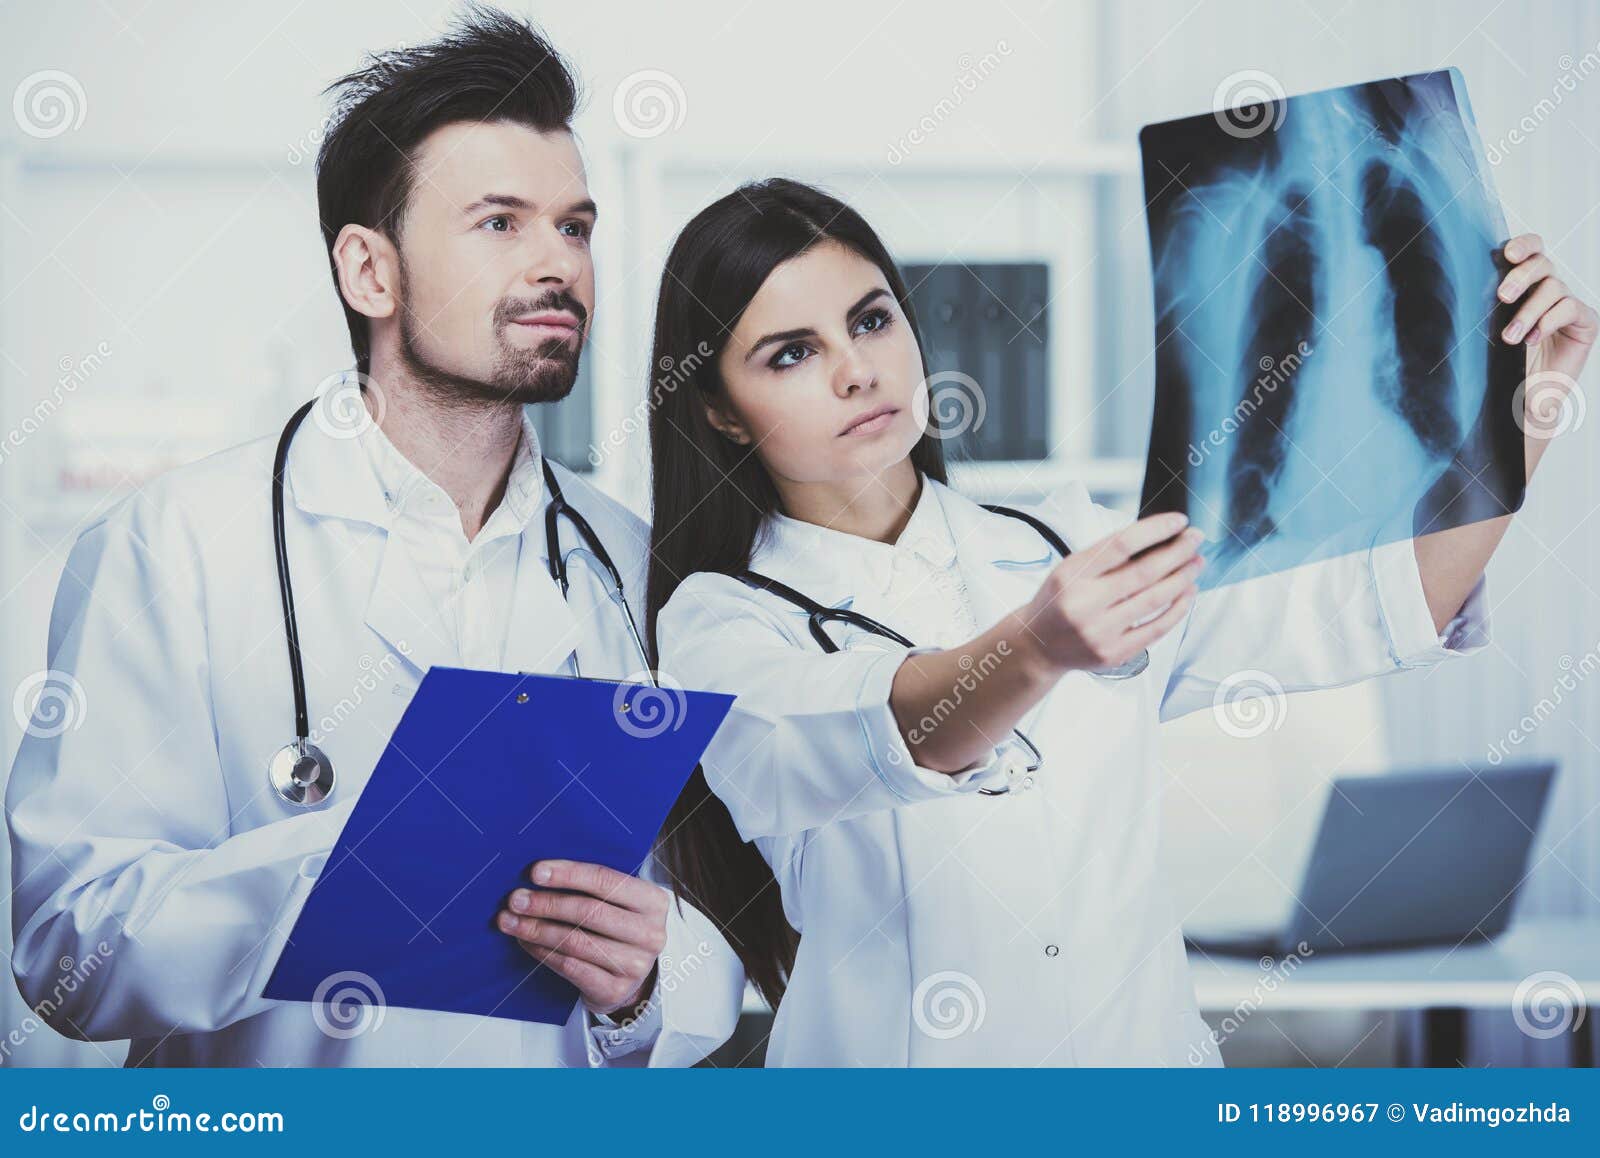 two young doctors are looking at roentgen in clinic.